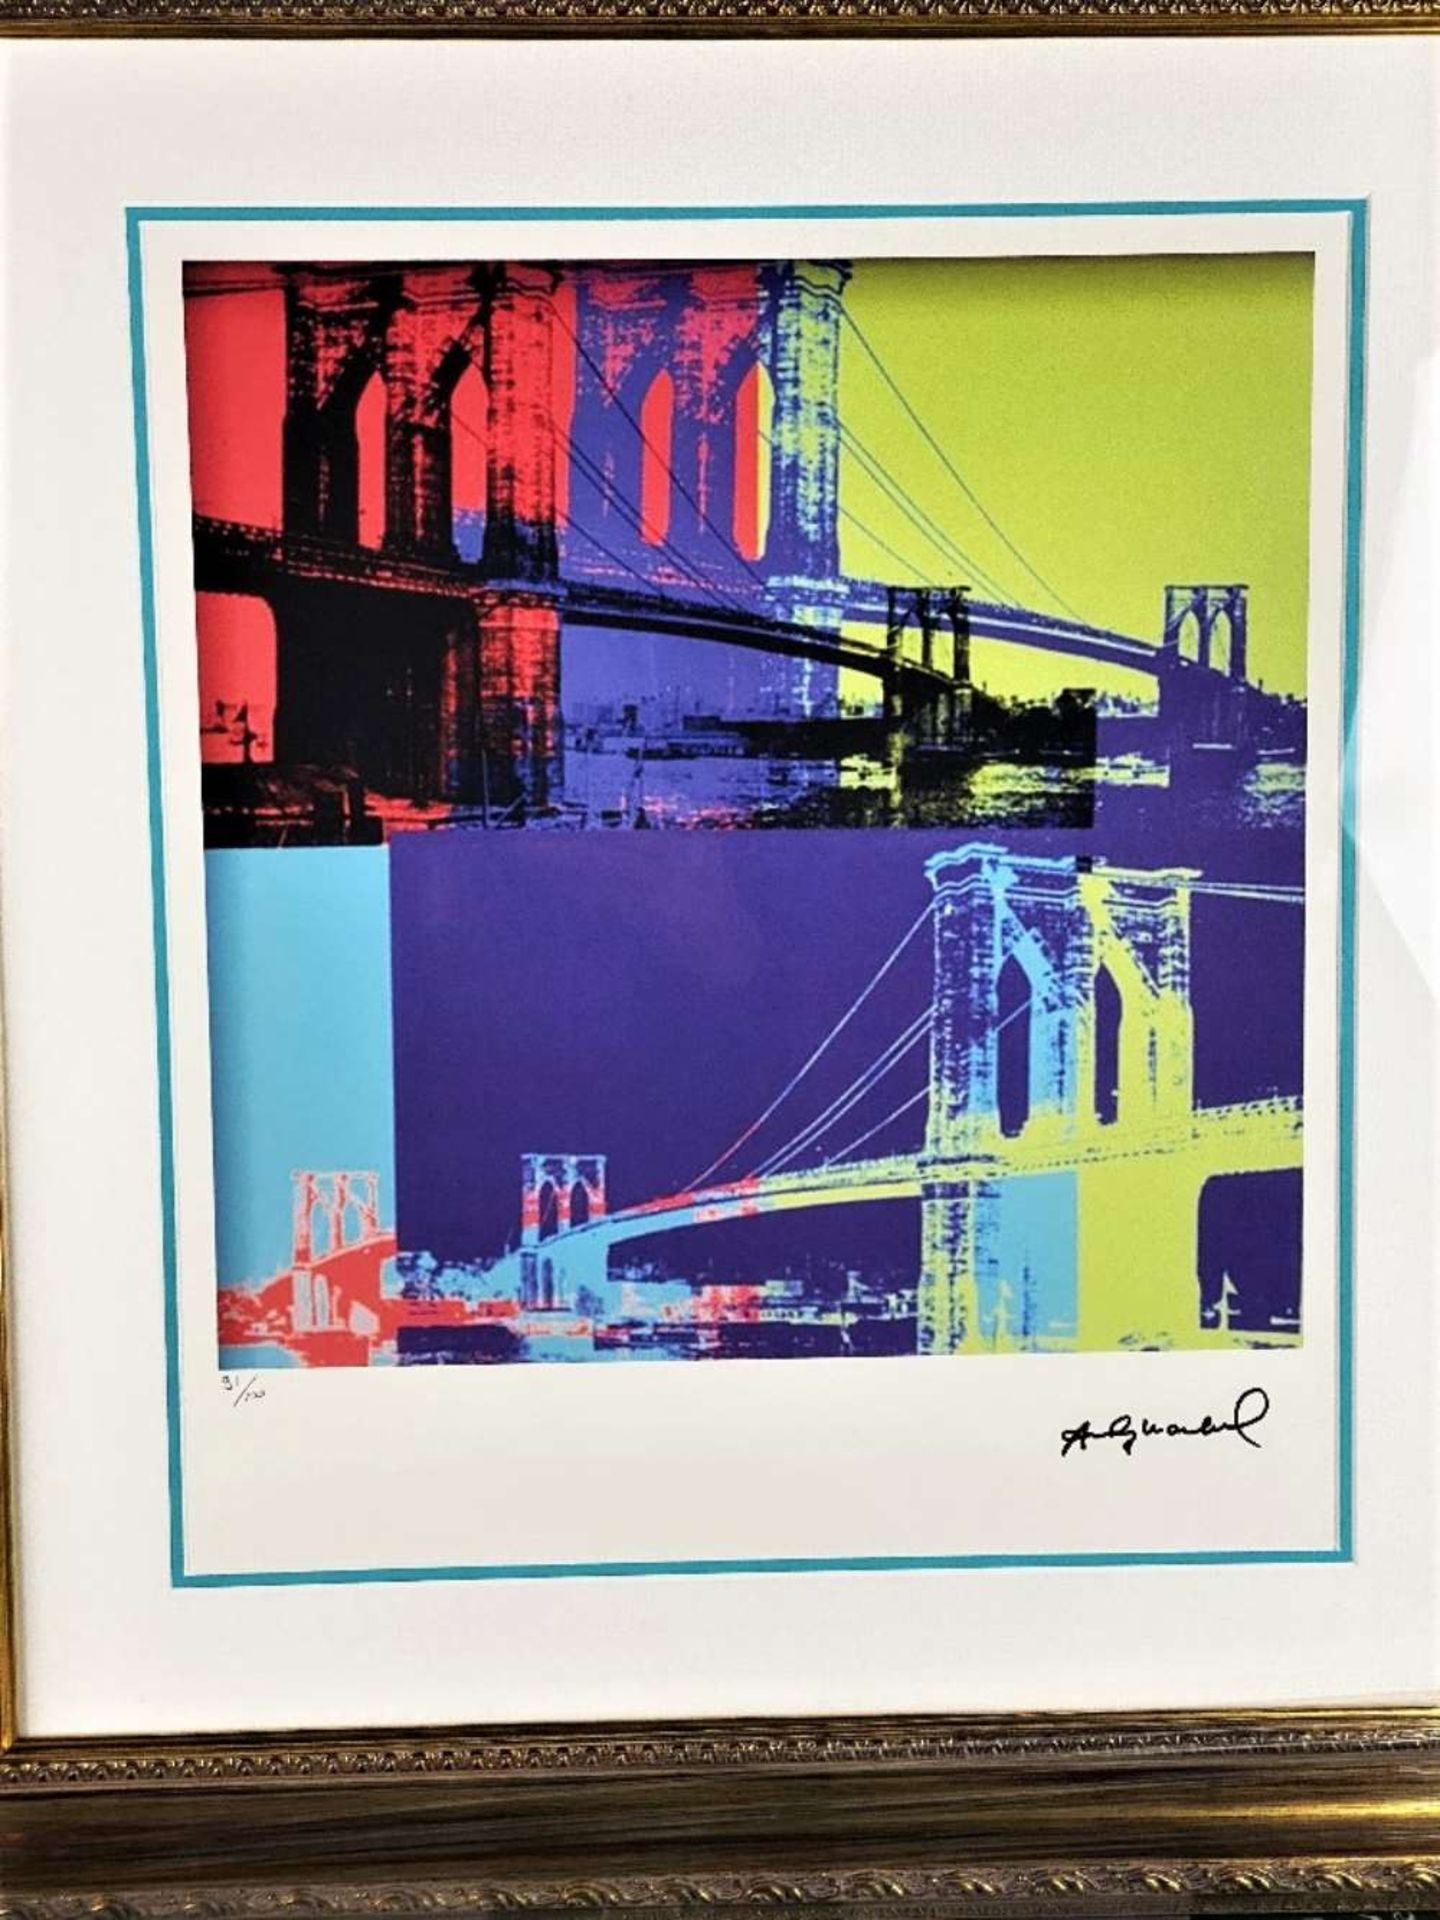 Andy Warhol (1928-1987) “Brooklyn Bridge” Numbered #91/100 Lithograph, Ornate Framed. - Image 2 of 7